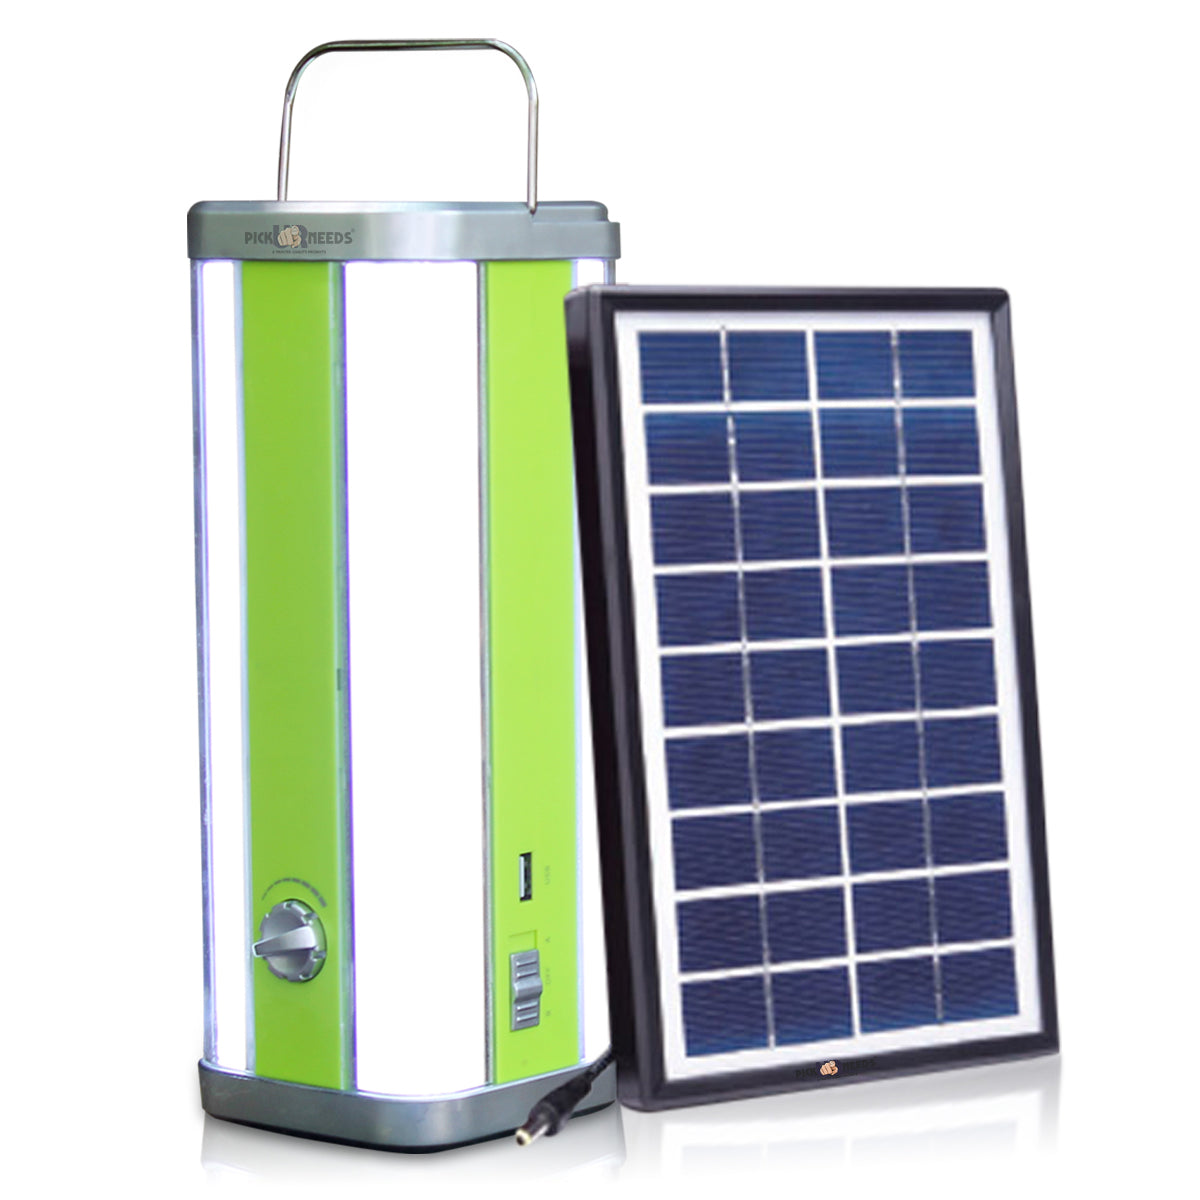 Pick Ur Needs High Range Rechargeable Home Emergency 4 Tube Lantern Light with with Solar Panel(3W+9V)